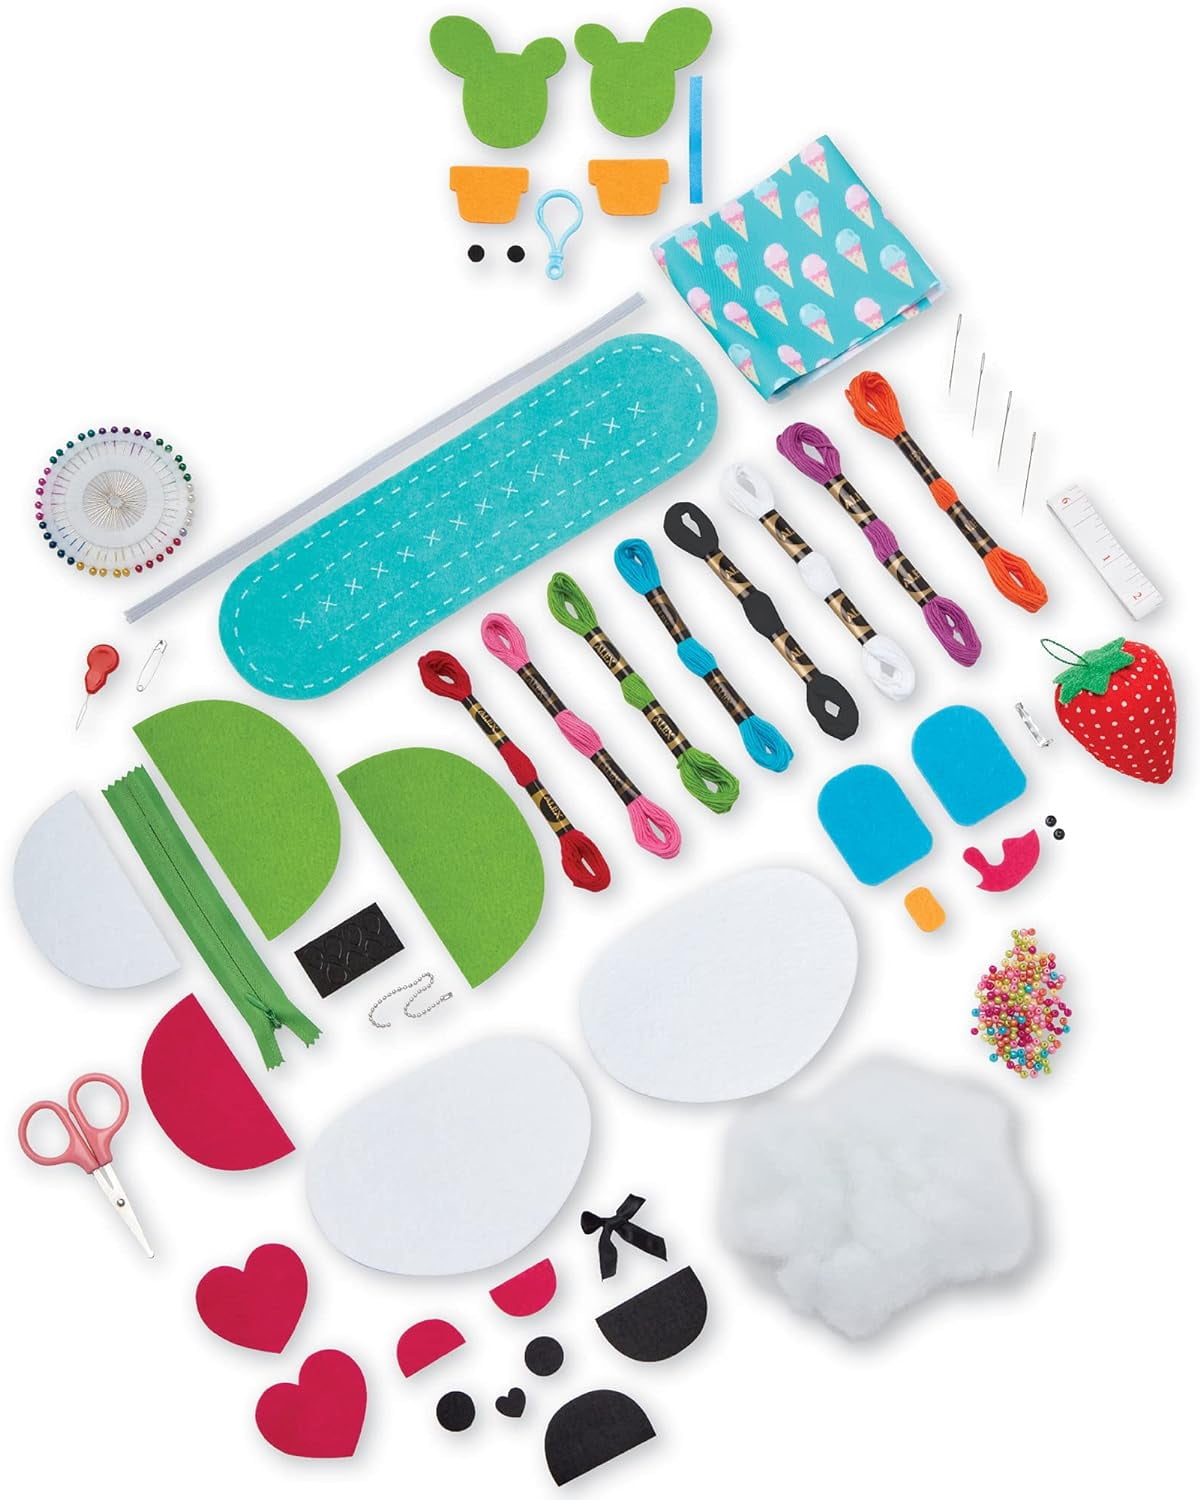 Best Deal for MKLEKYY First Sewing Kit for Kids, DIY Craft Sewing